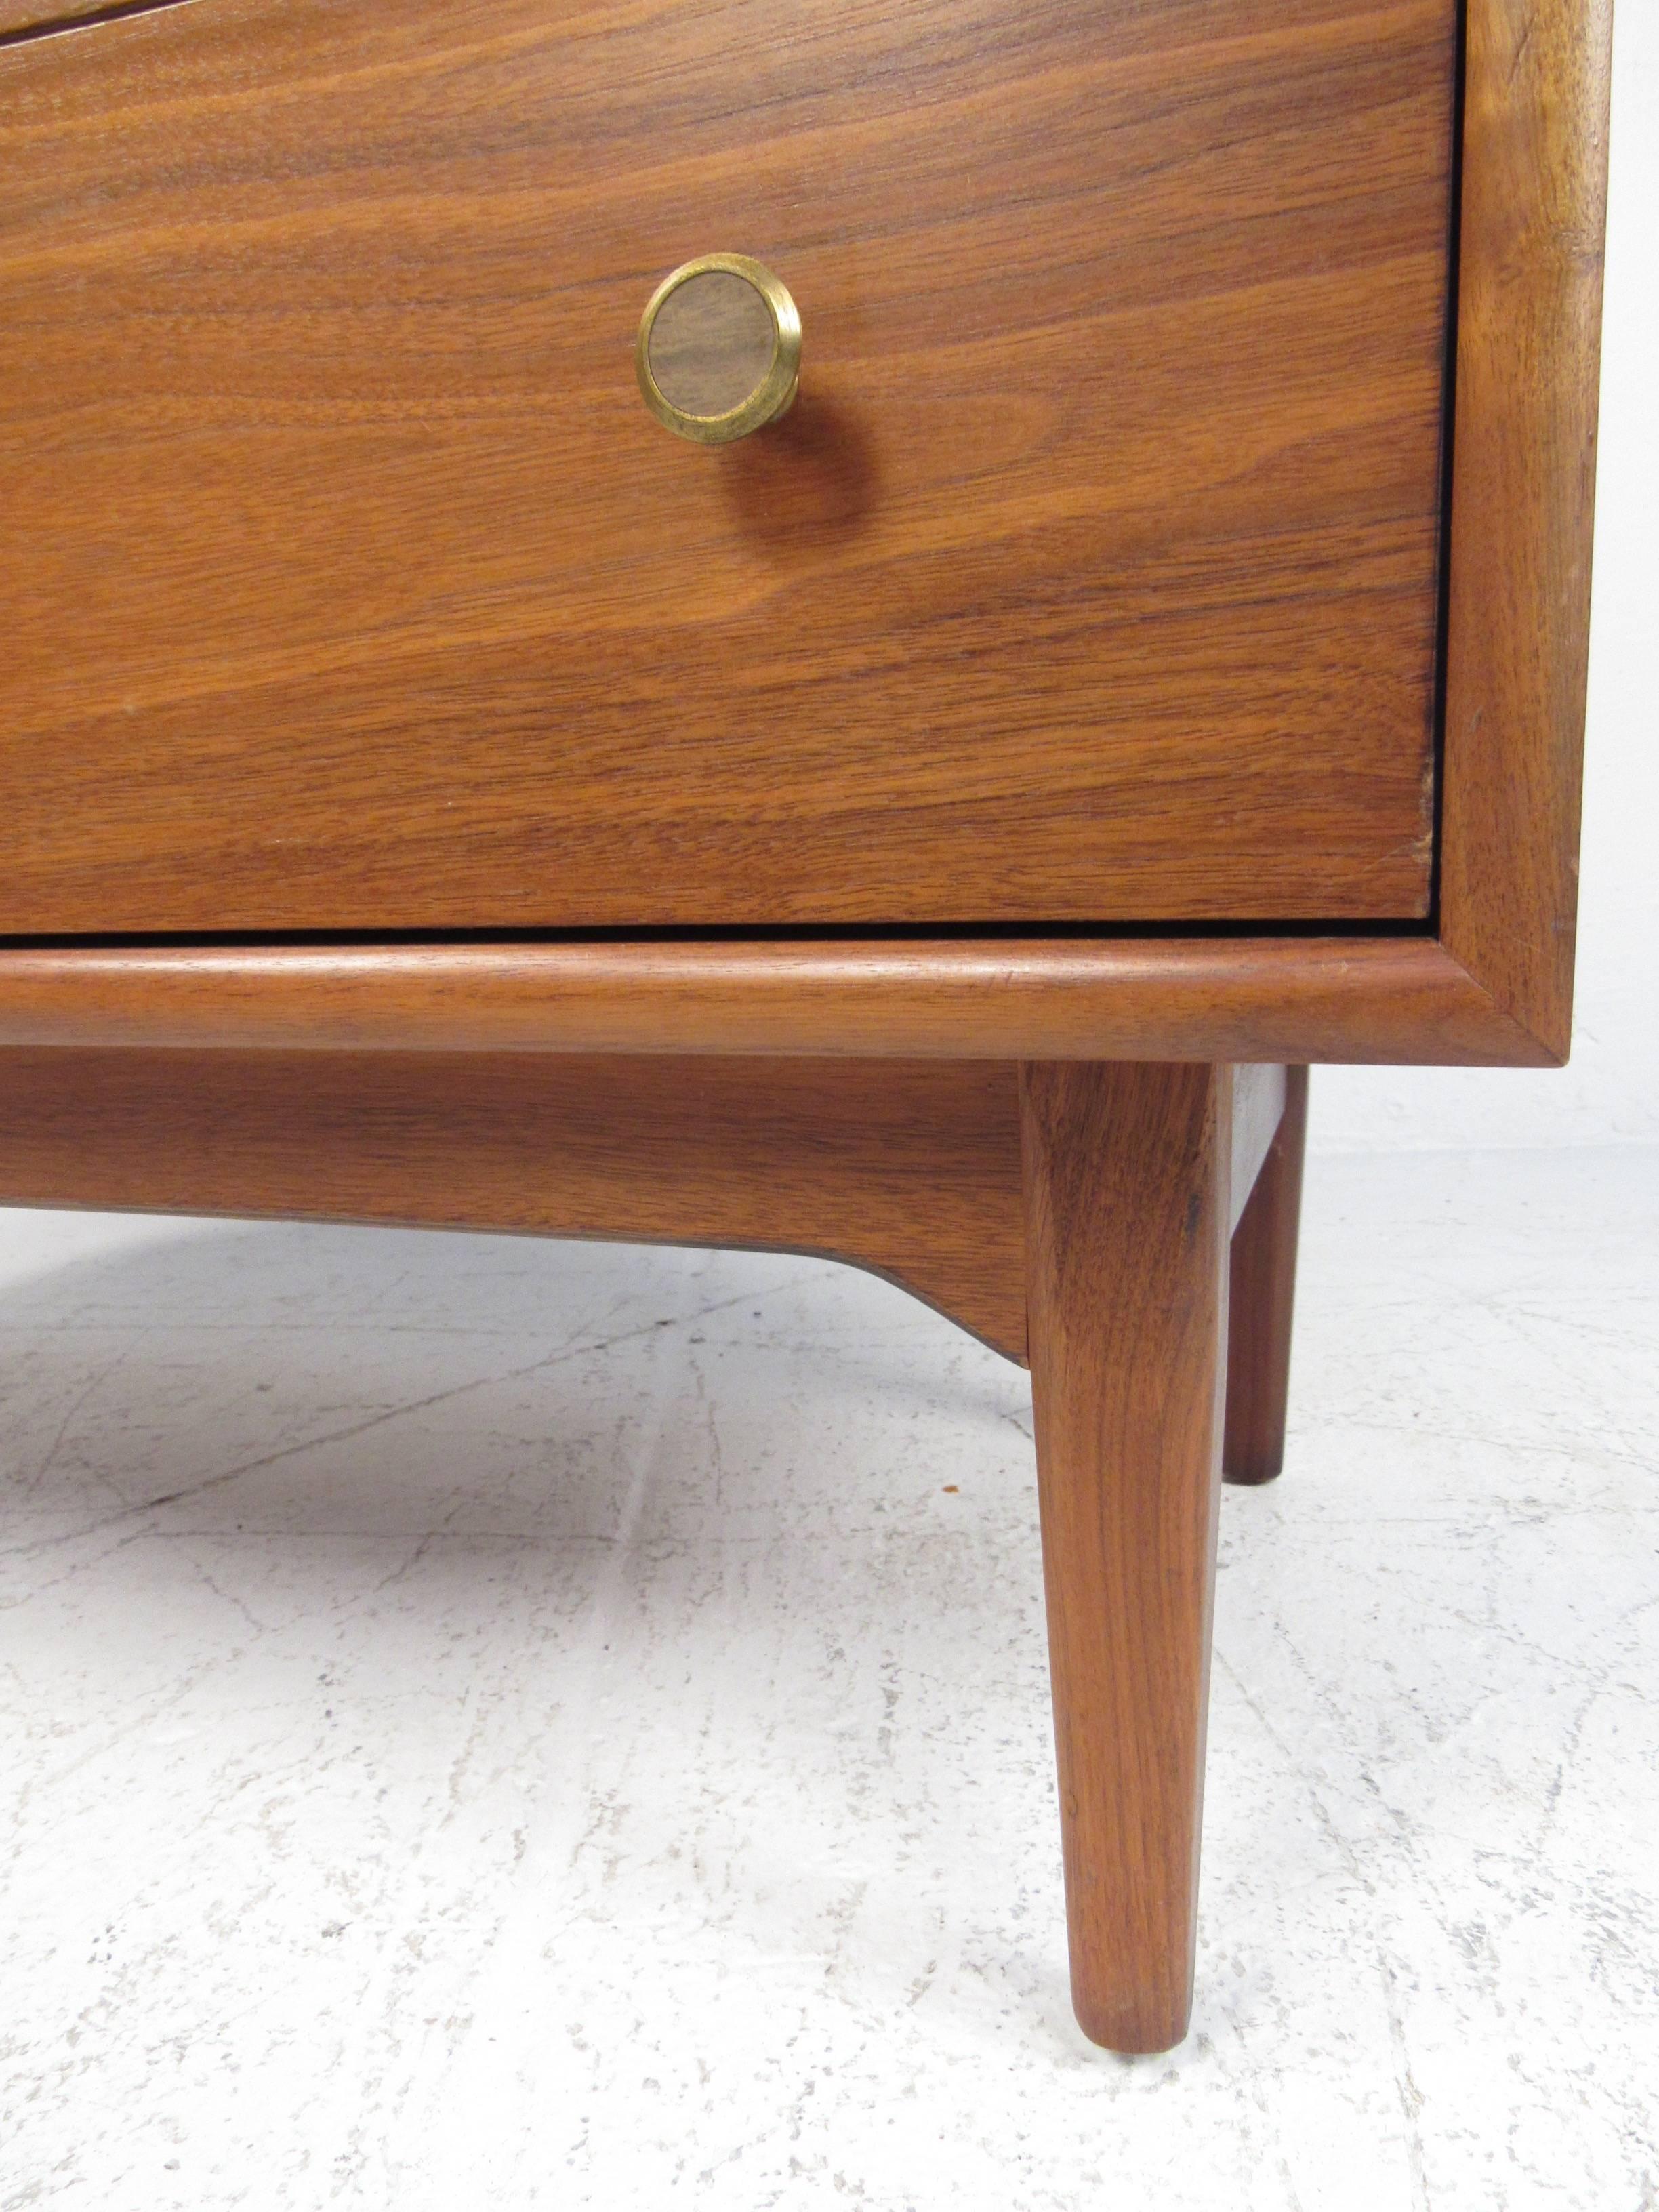 American Mid-Century Modern Bookcase with Writing Desk by Kipp Stewart for Drexel